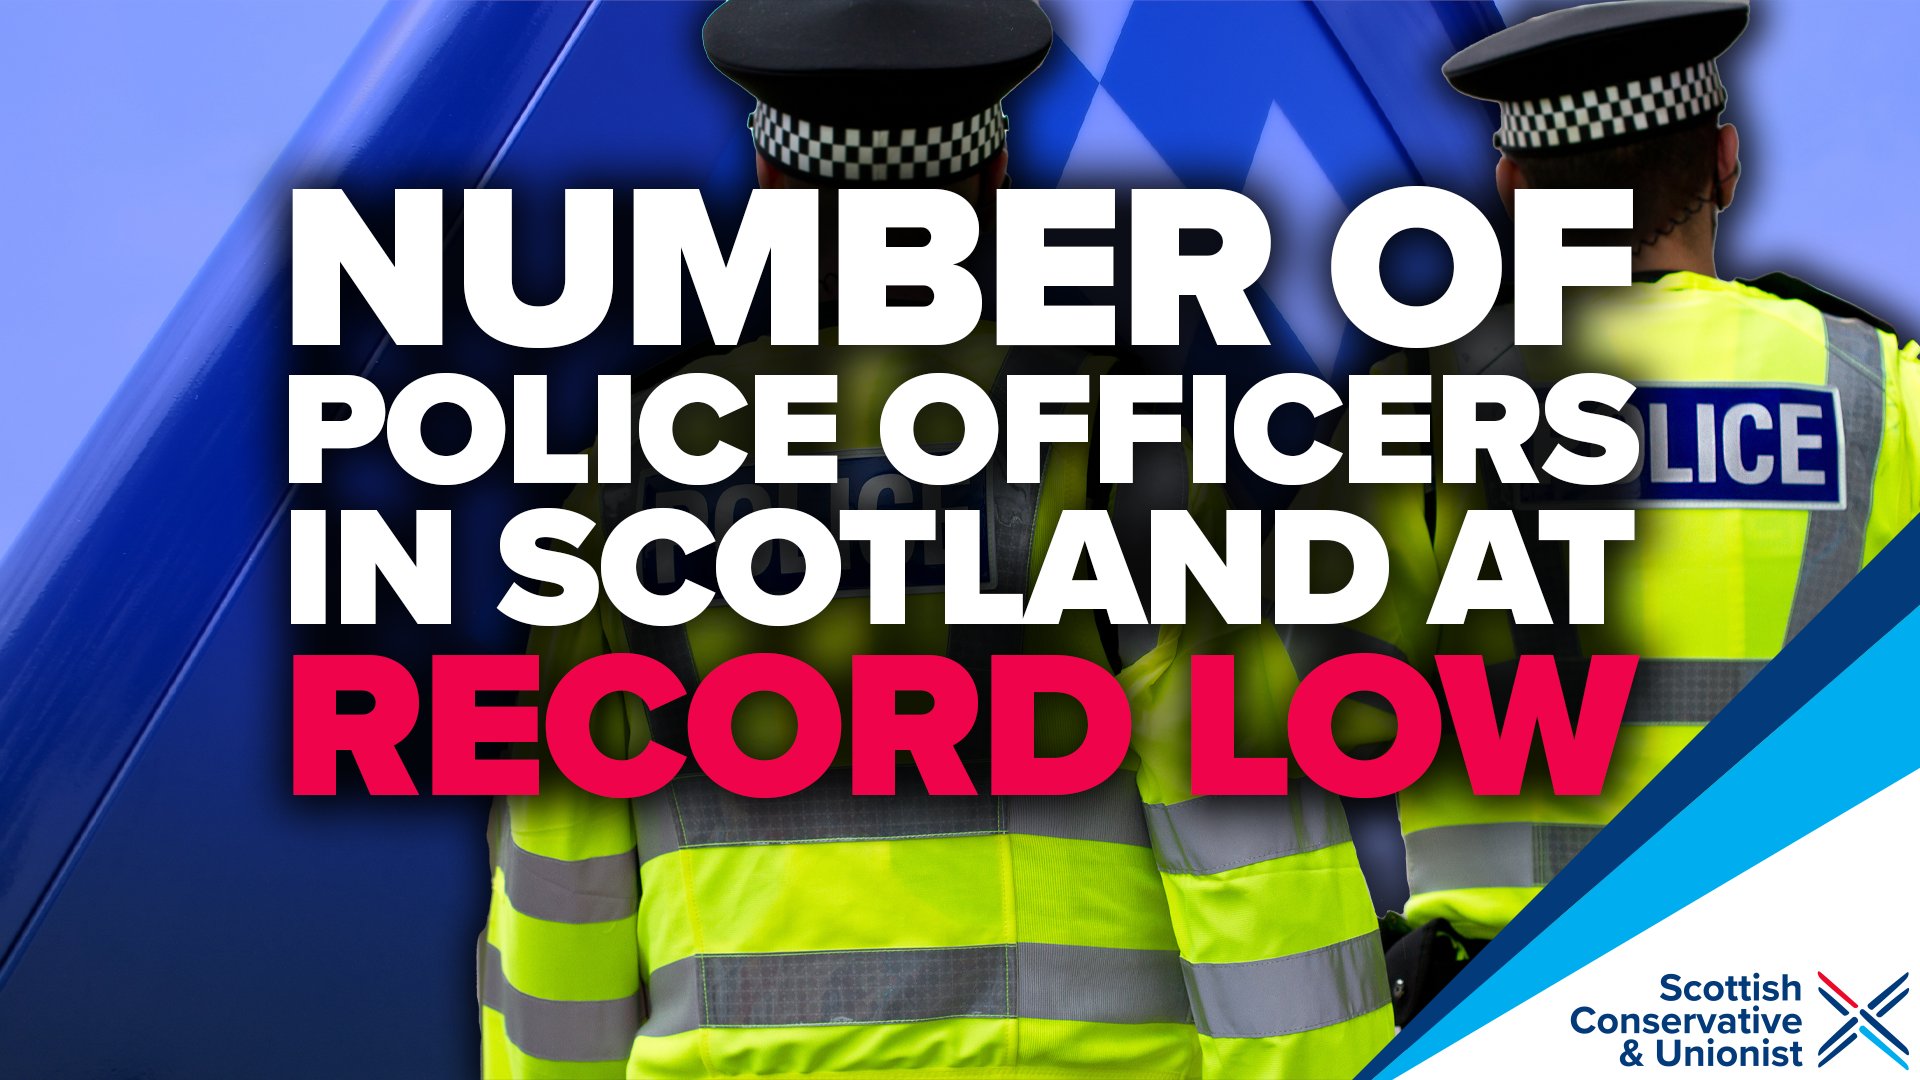 Police 101 Failures of the SNP in Government